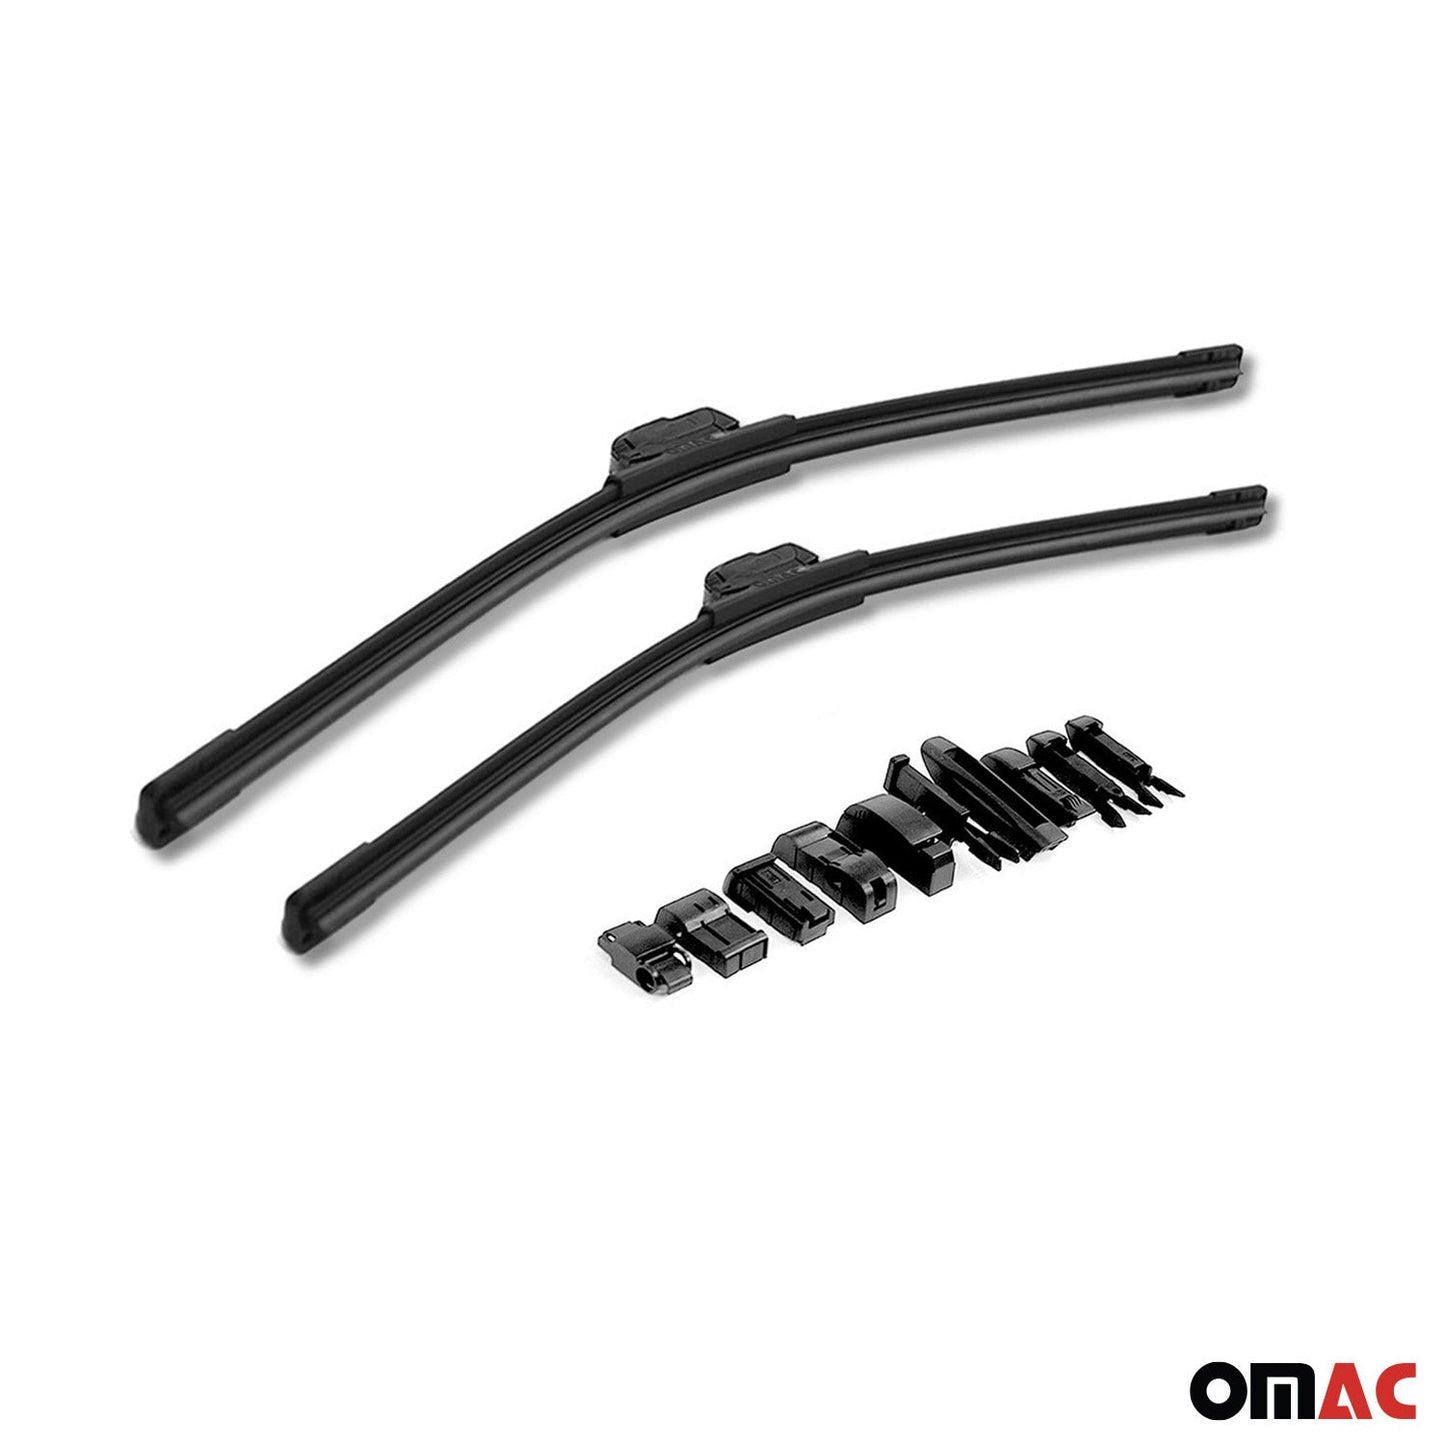 OMAC Front Windshield Wiper Blades Set for Fiat Punto 2005-2018 A019014